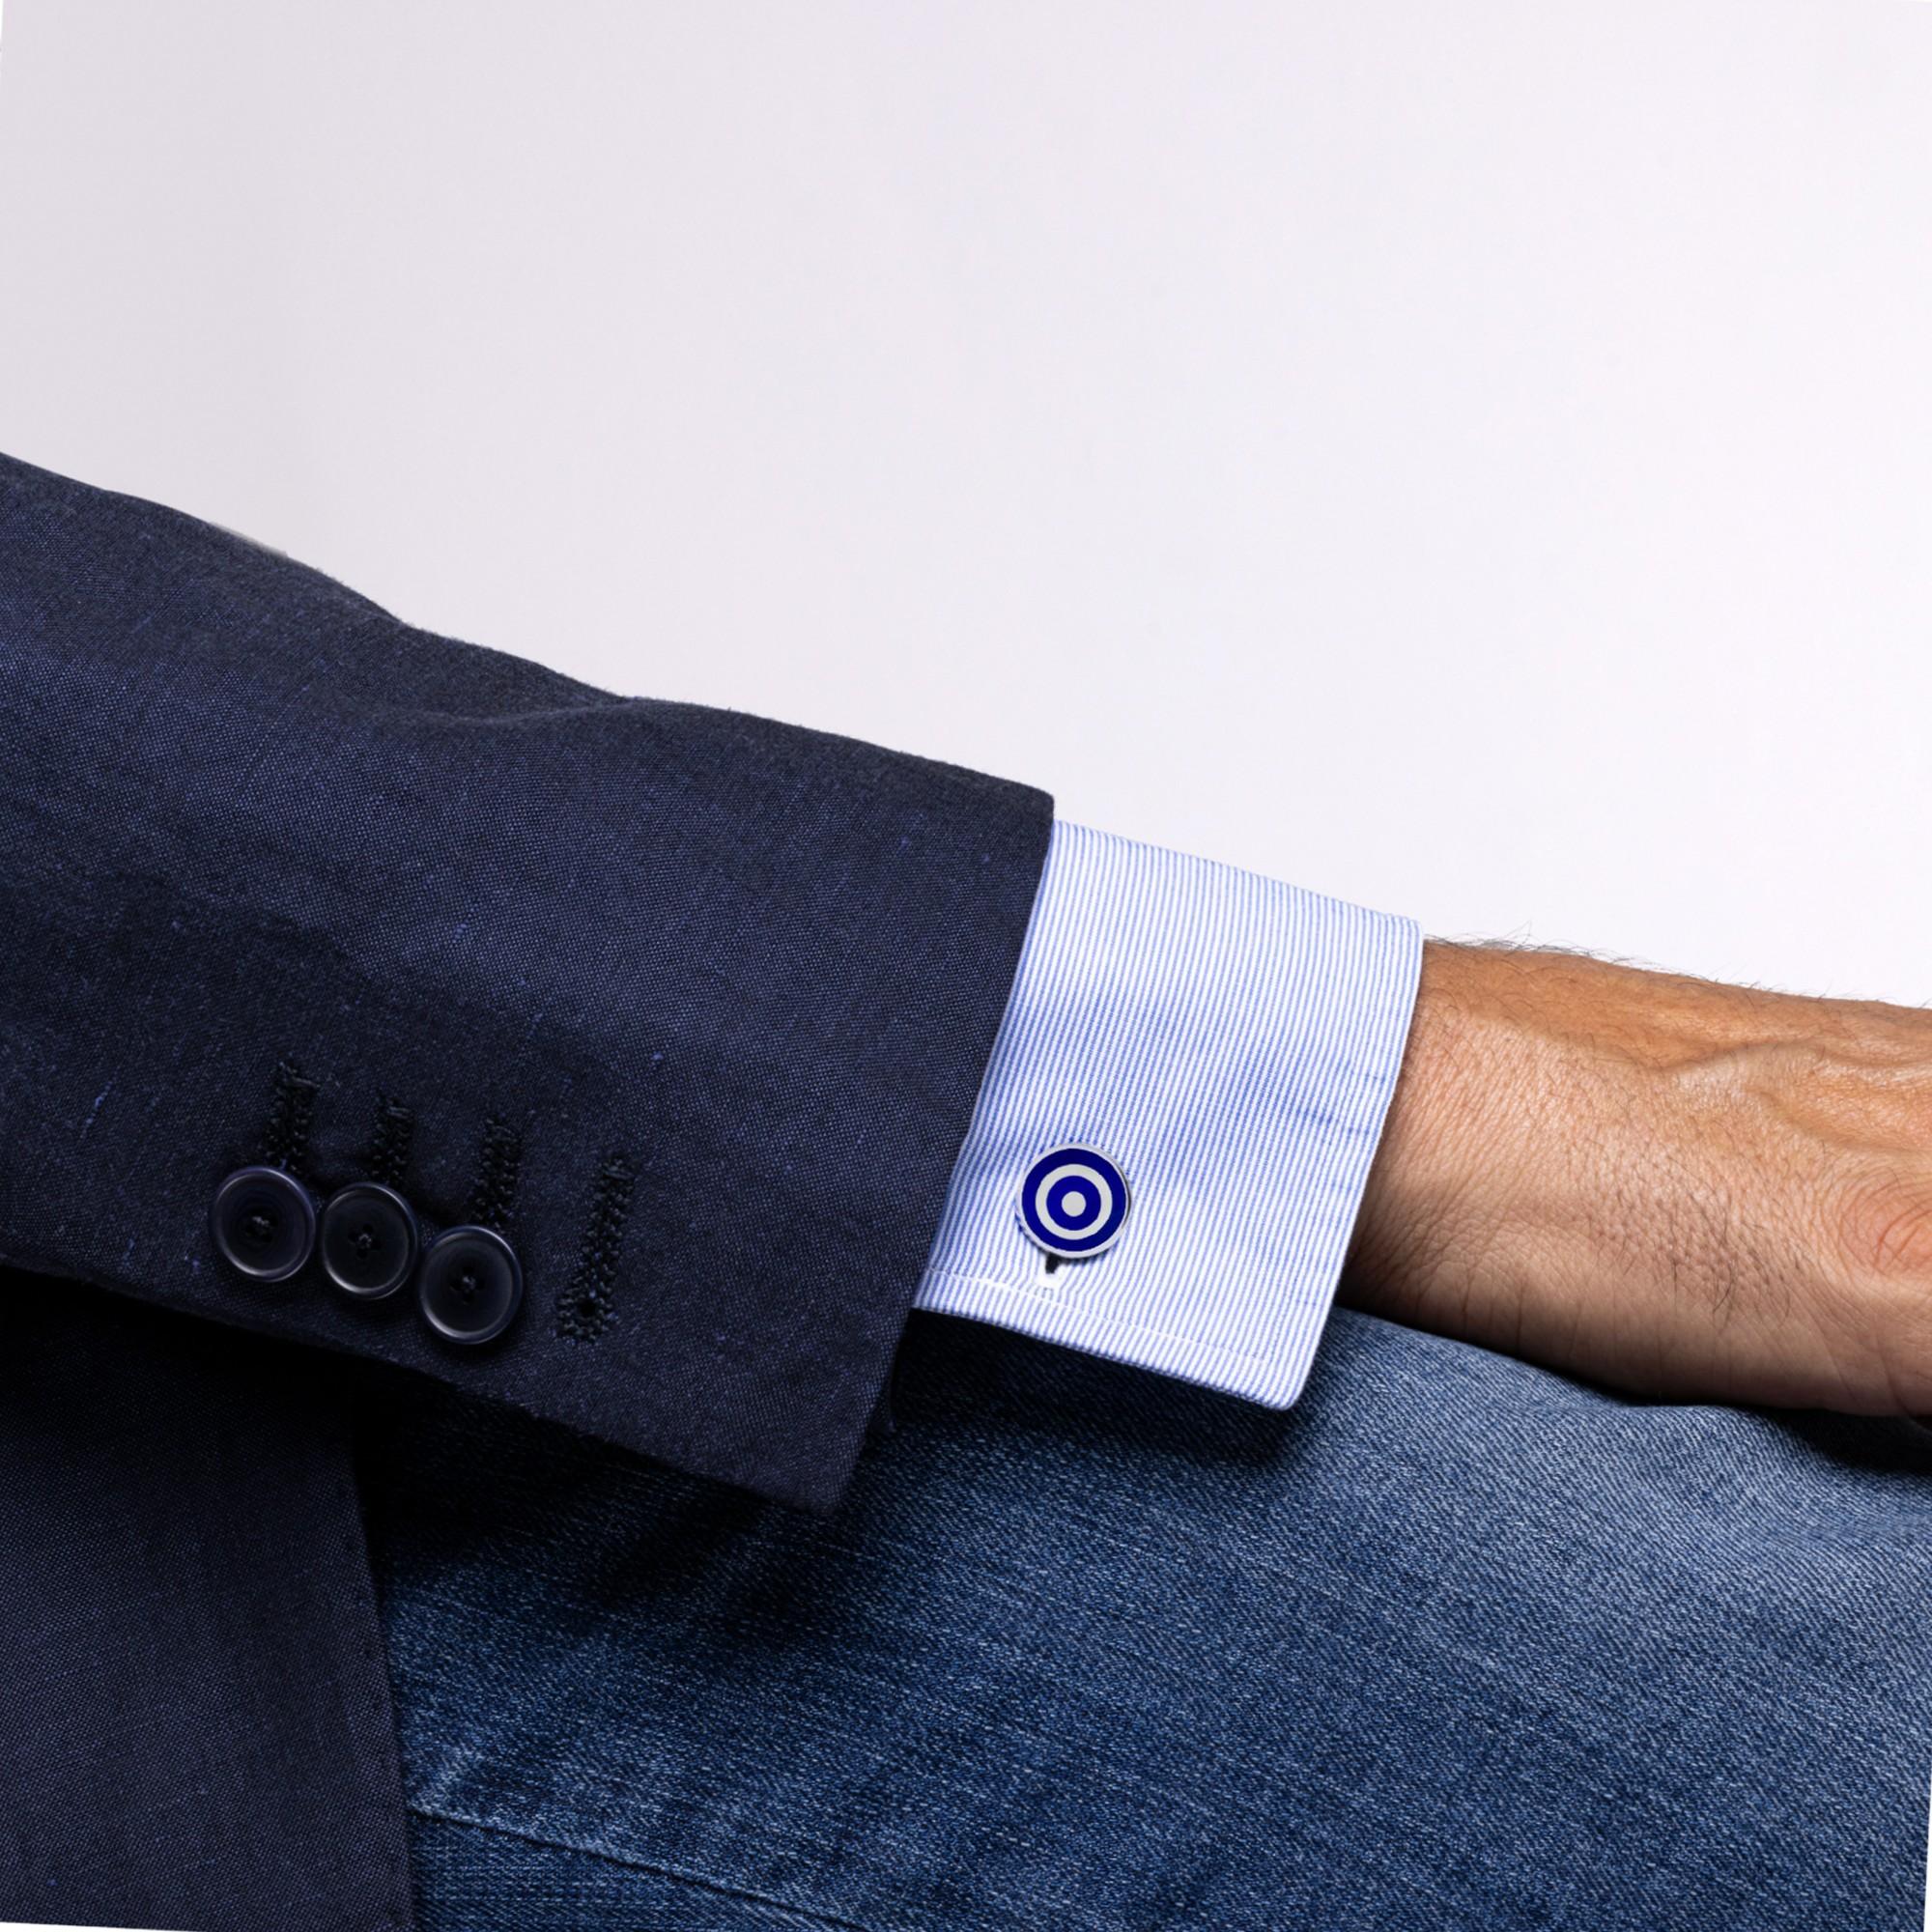 Alex Jona design collection, hand crafted in Italy, rhodium plated Sterling Silver cufflinks with blue enamel. These cufflinks feature a T-Bar fastening, aiding in easy use and confidence that they'll stay secured to your shirt. Diameter: 0.63 in /